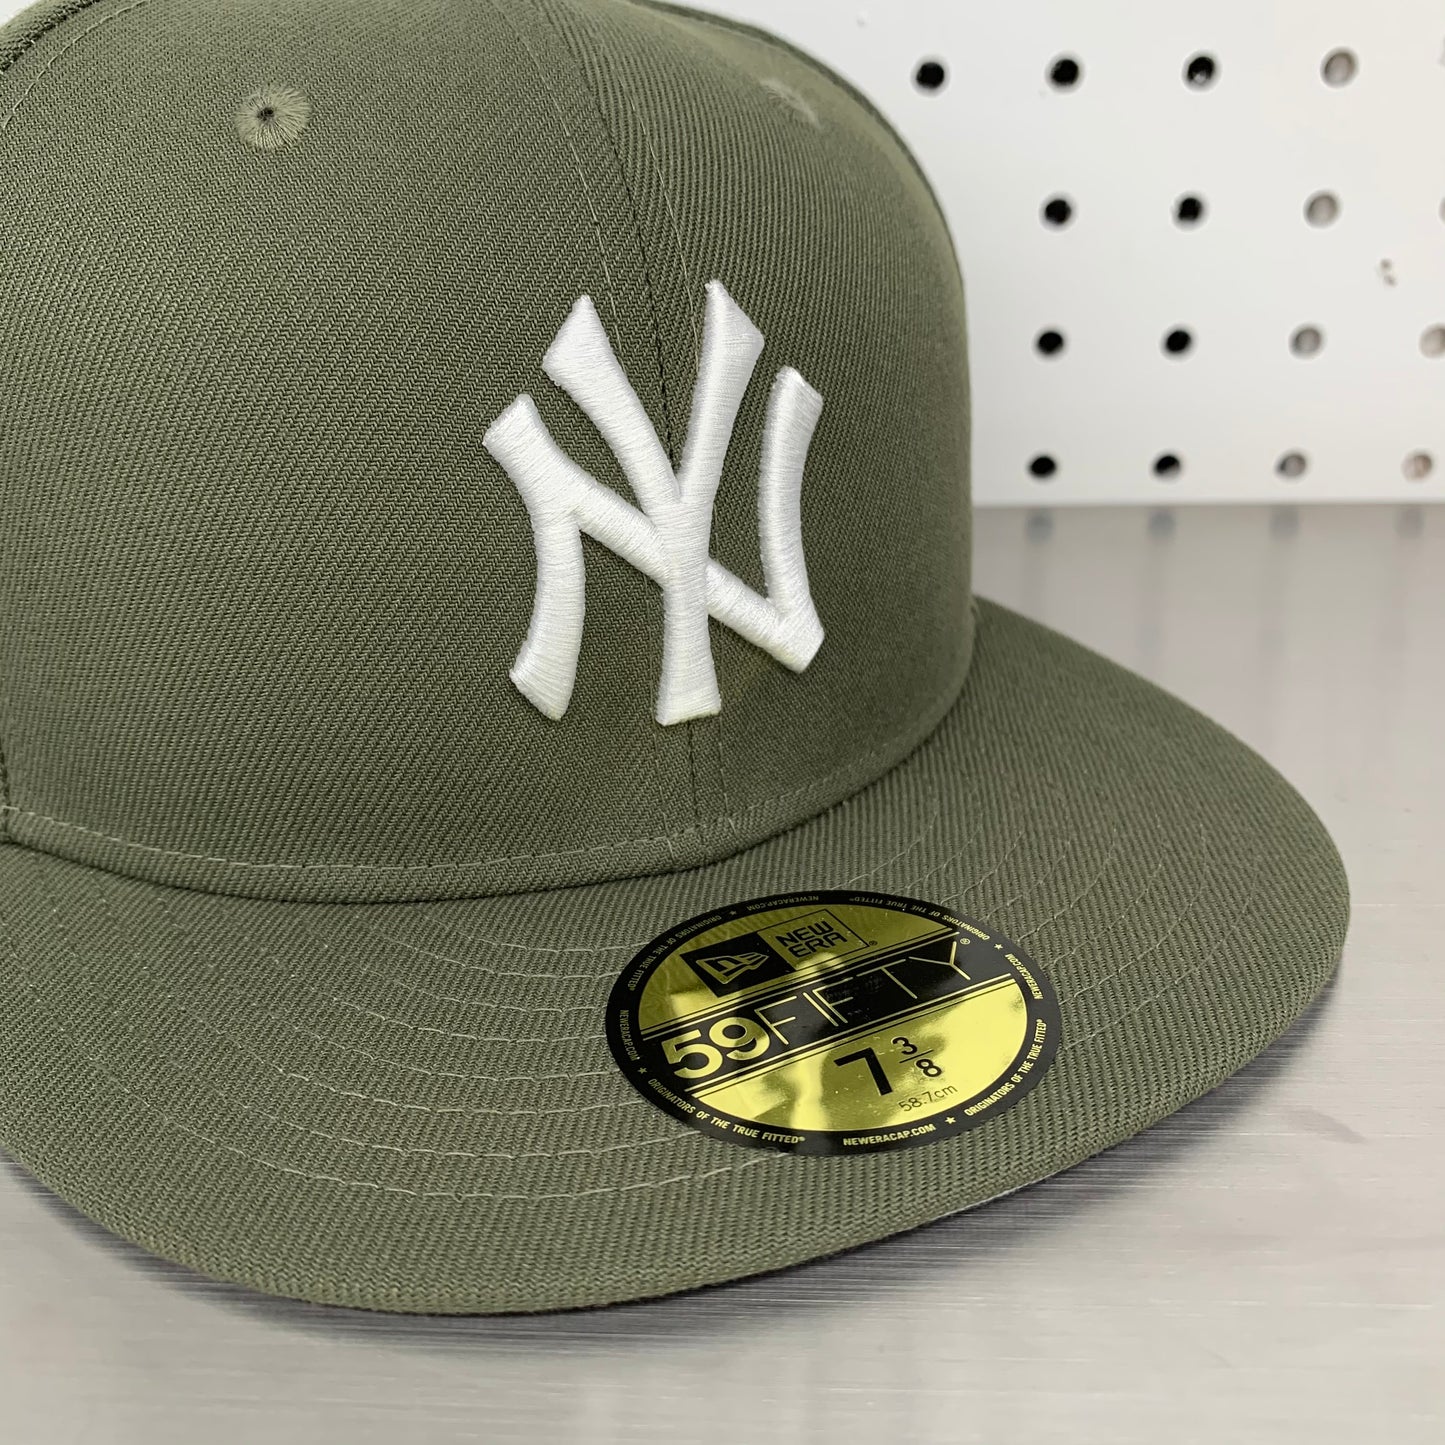 New York Yankees New Era 59FIFTY Fitted Cap "Olive"